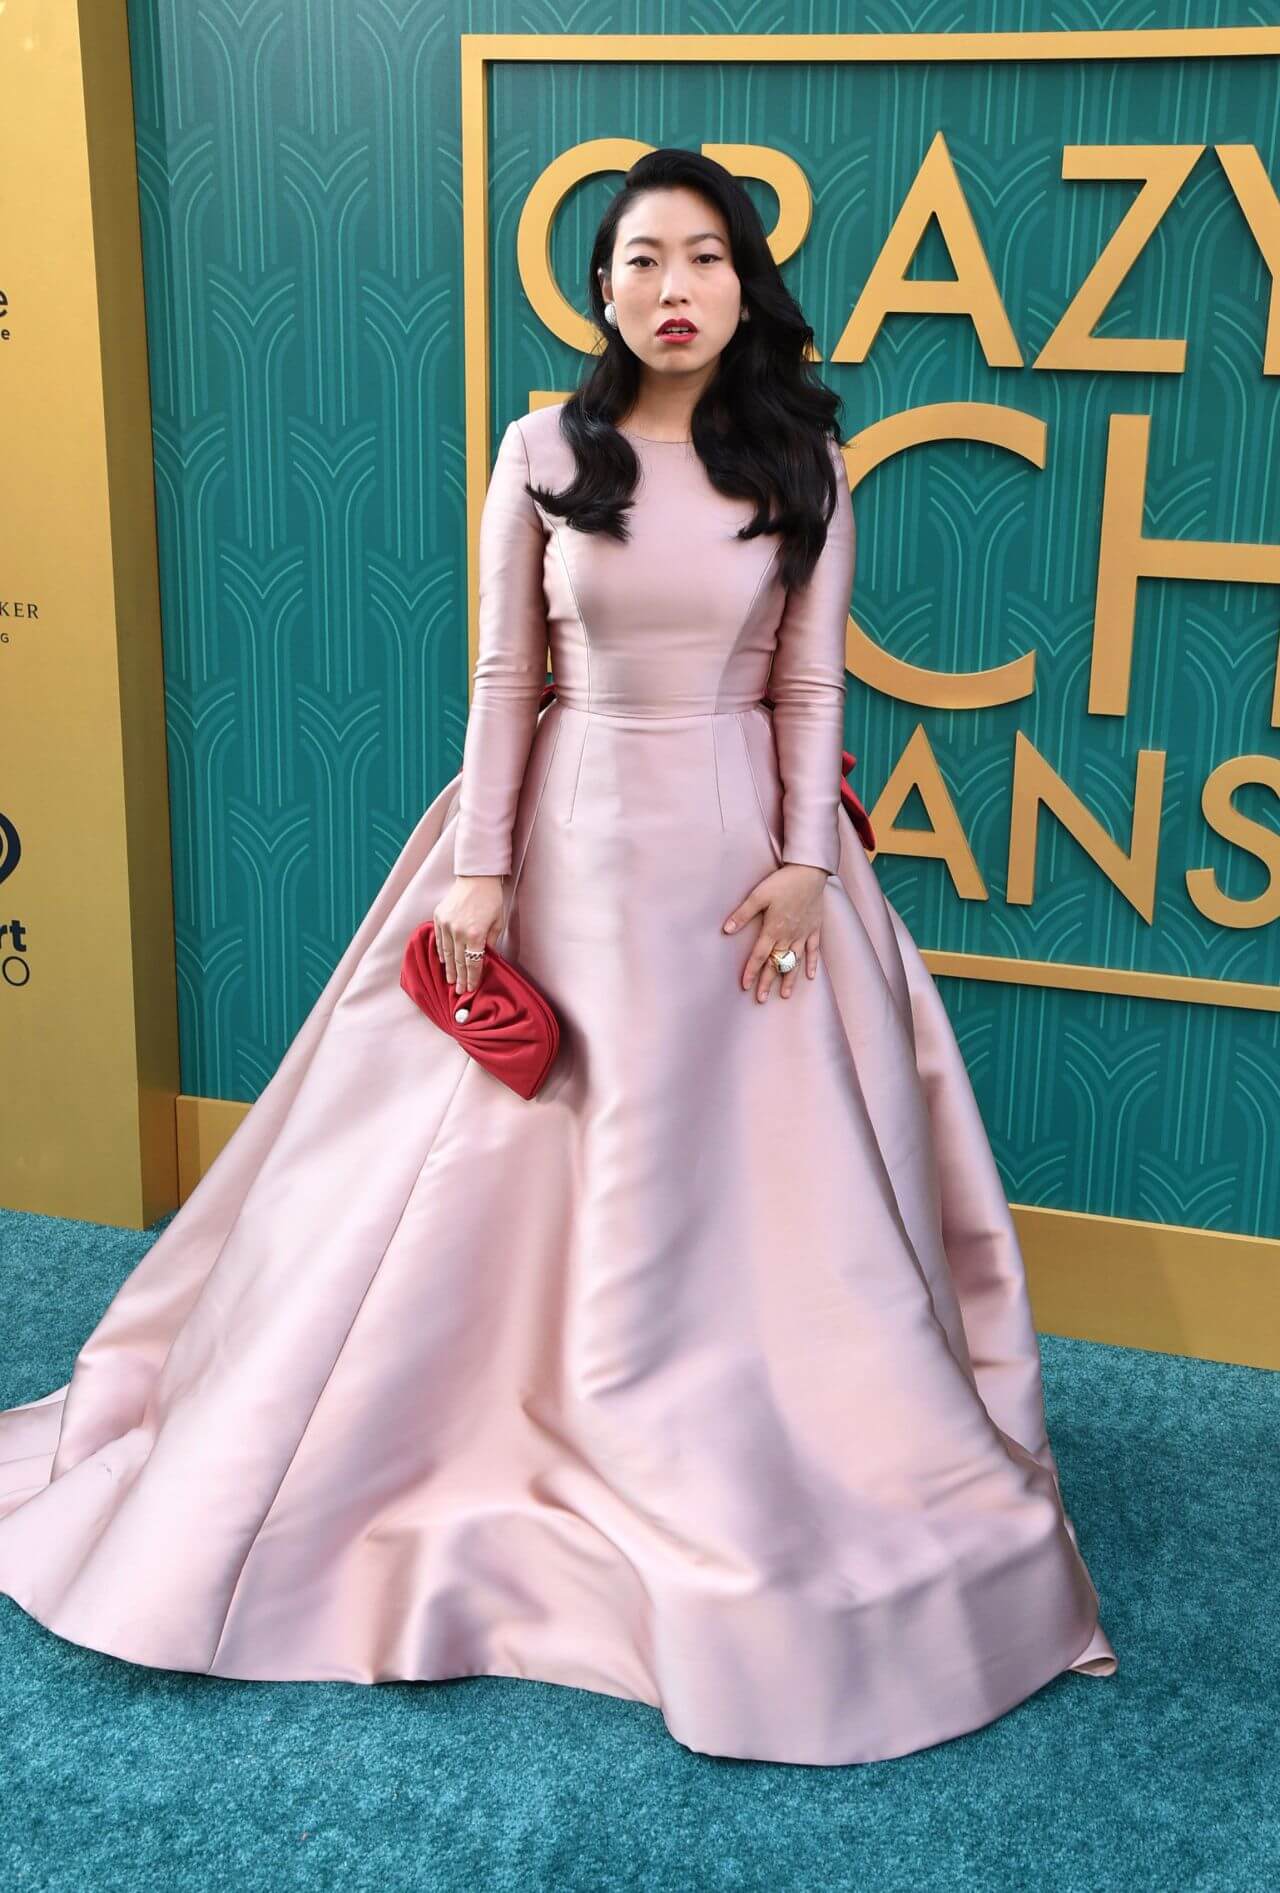 Awkwafina  In Shiny Dusky Pink Full Sleeves Long Flare Gown At “Crazy Rich Asians” Premiere in LA